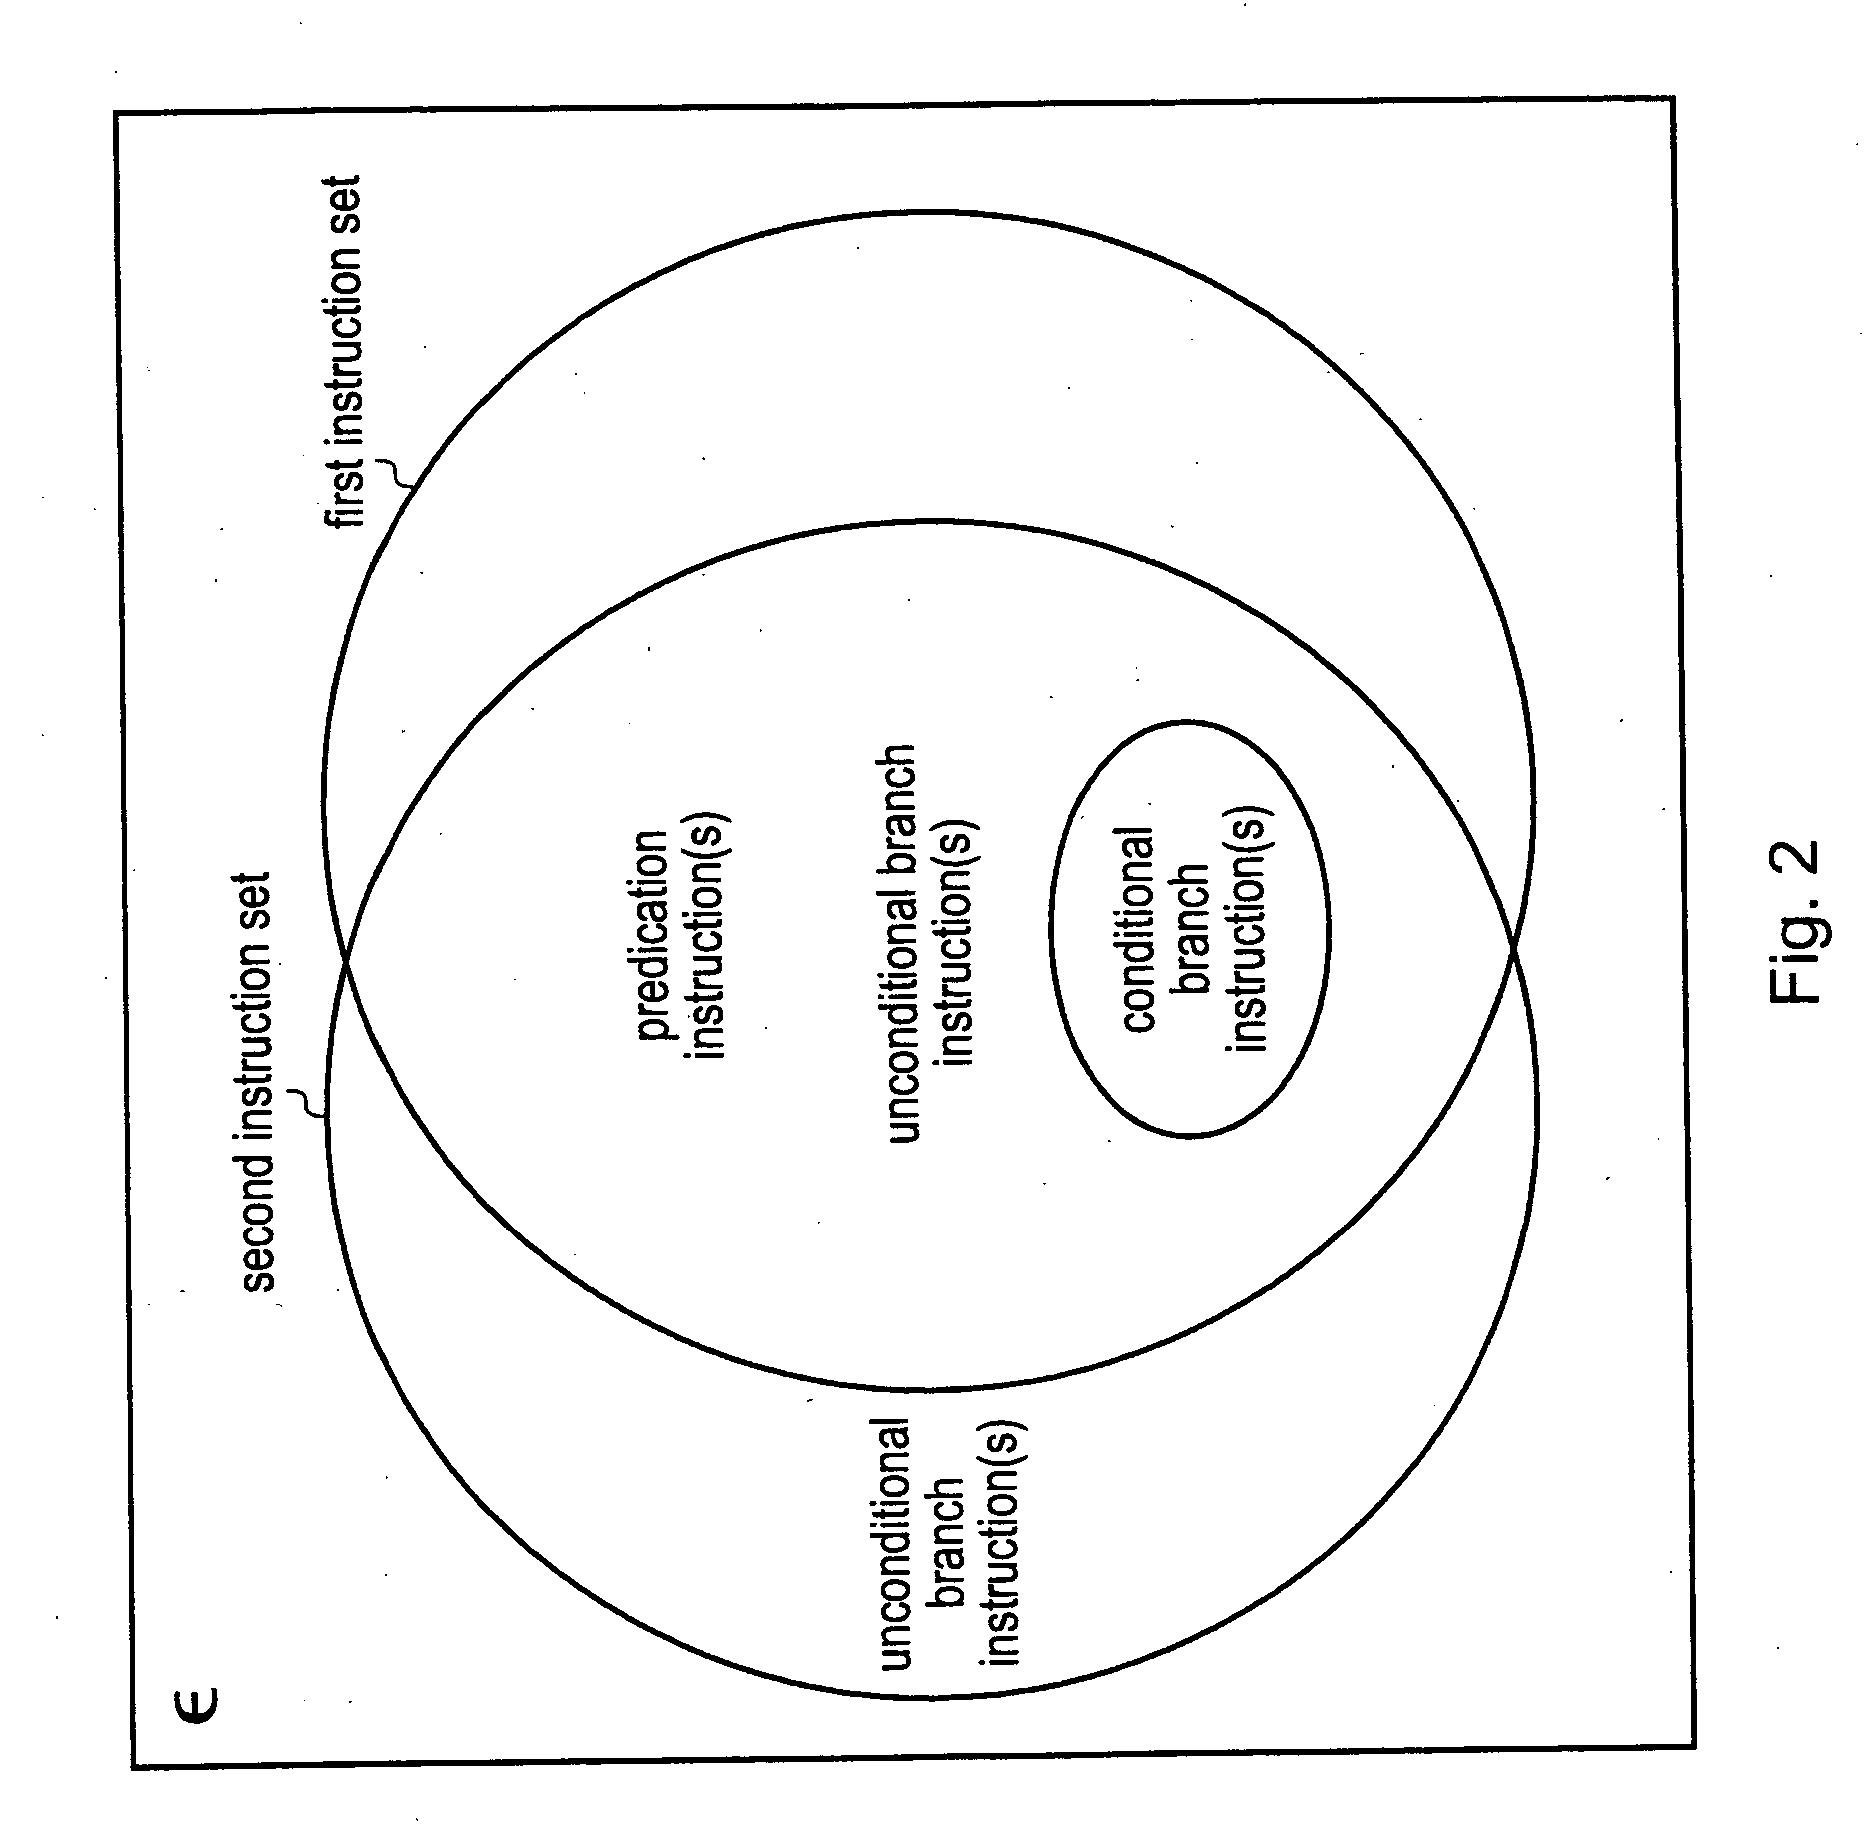 Condition branch instruction encoding within a multiple instruction set data processing system